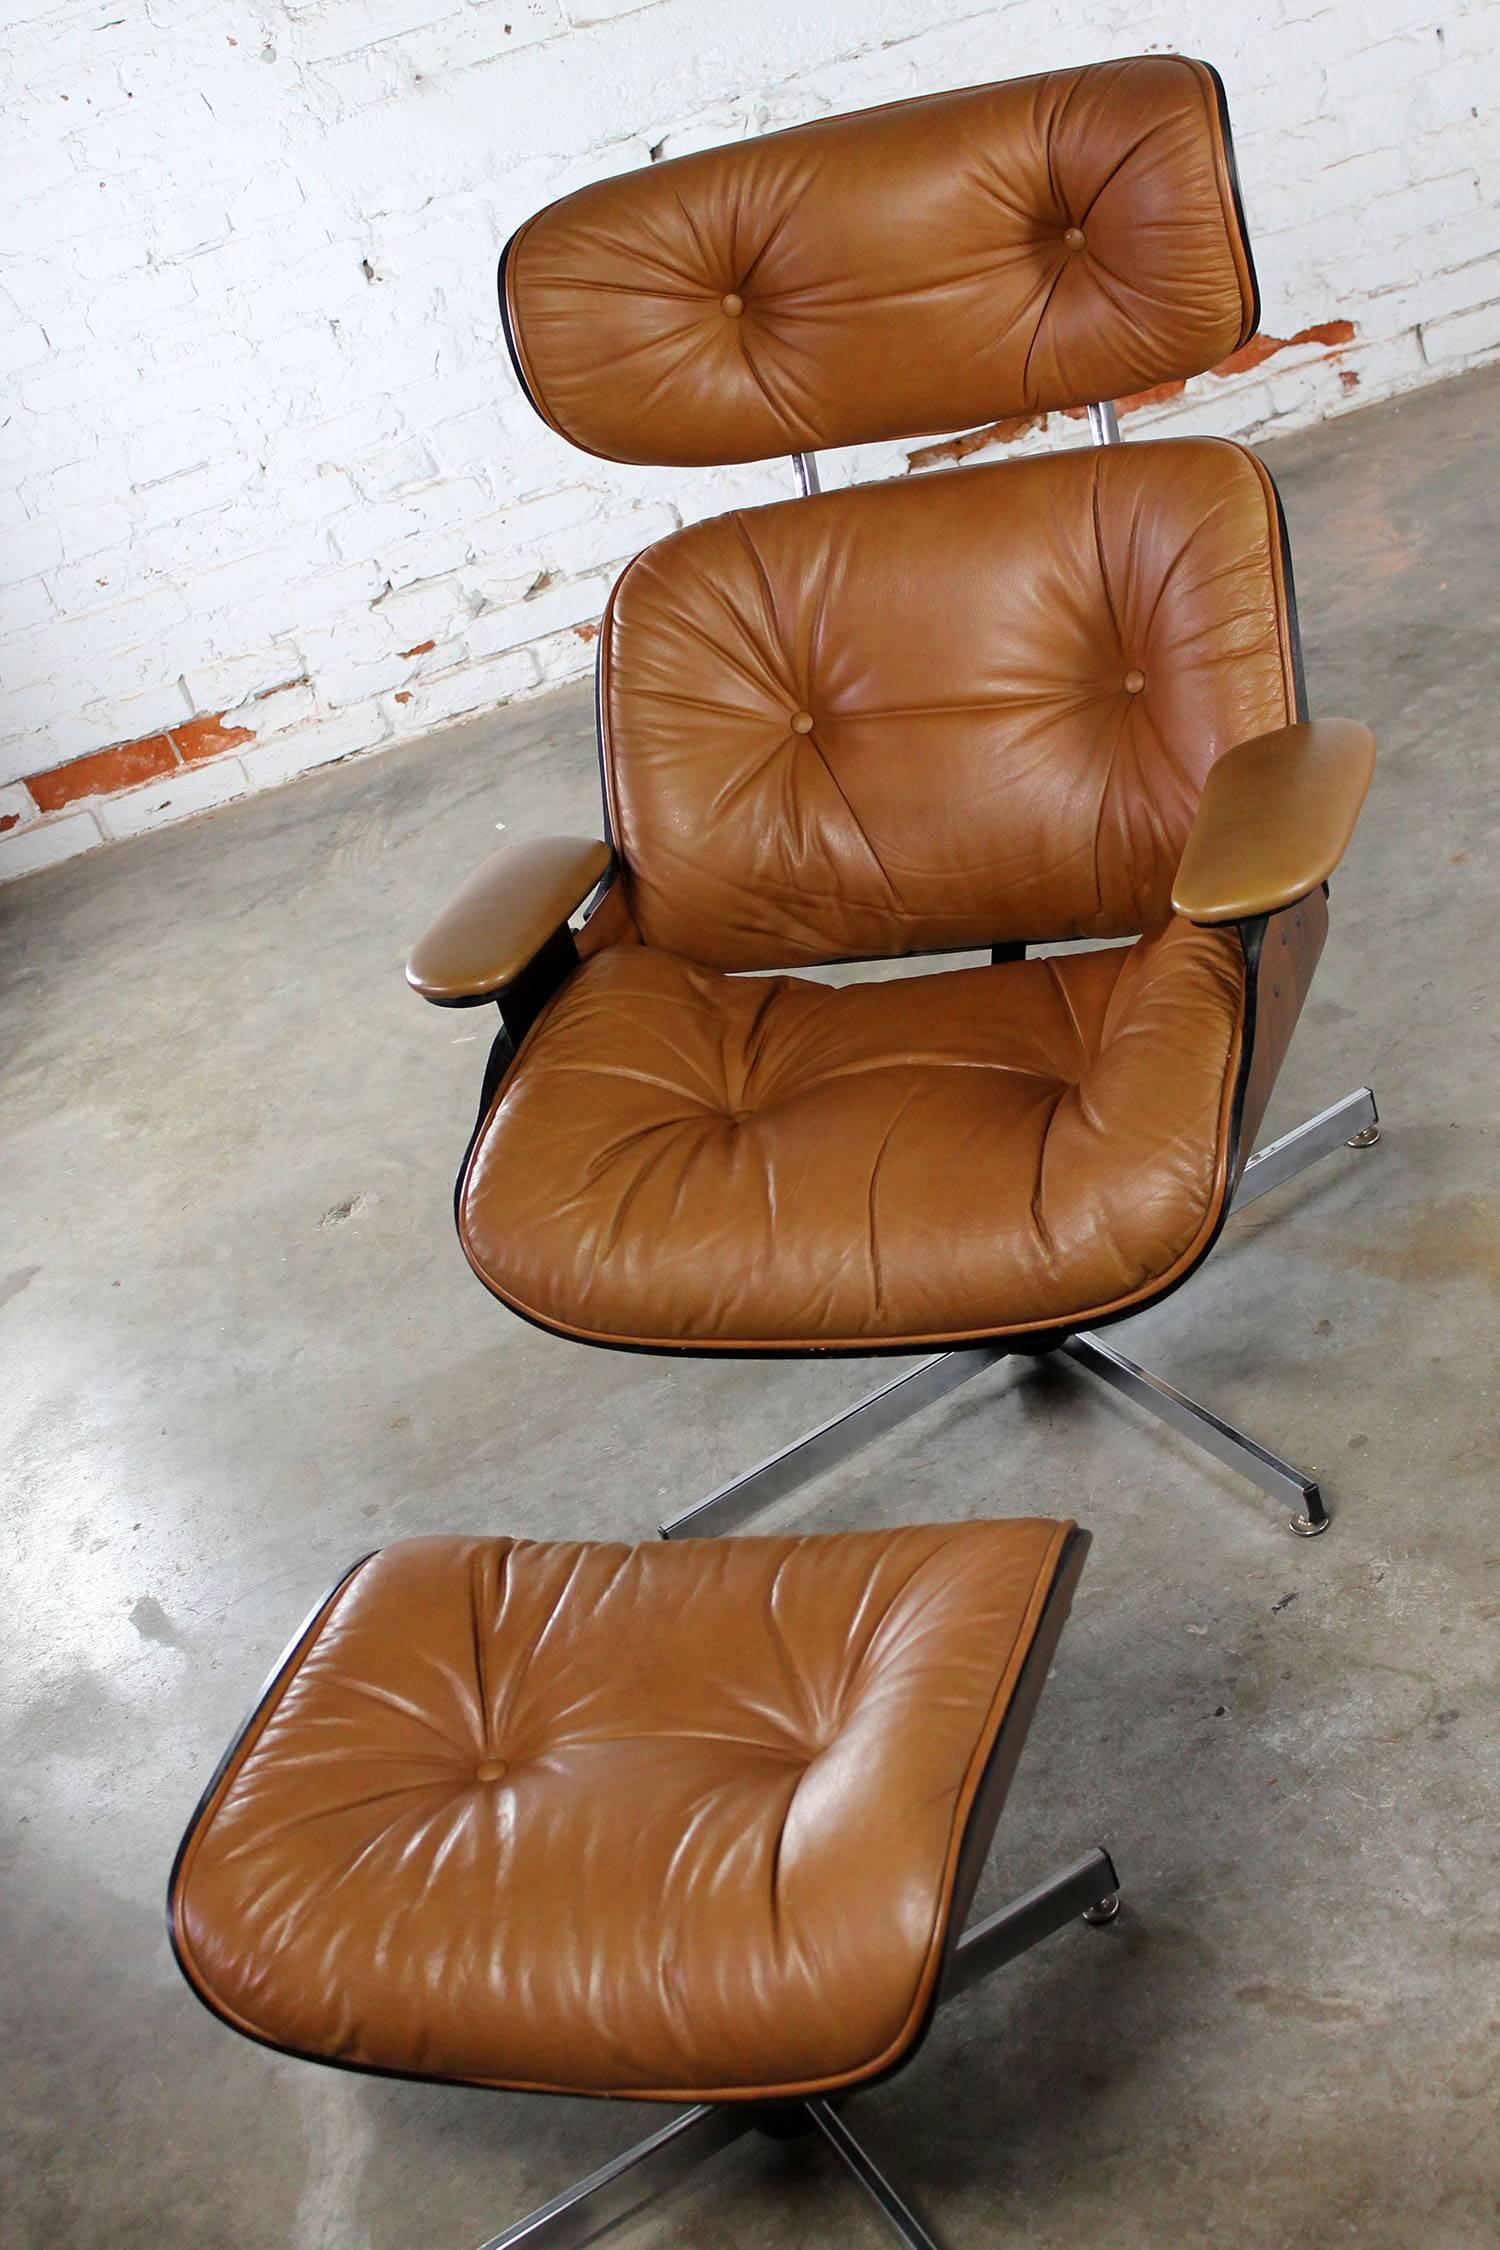 20th Century Mid-Century Modern Plycraft Eames-Style Lounge Chair and Ottoman